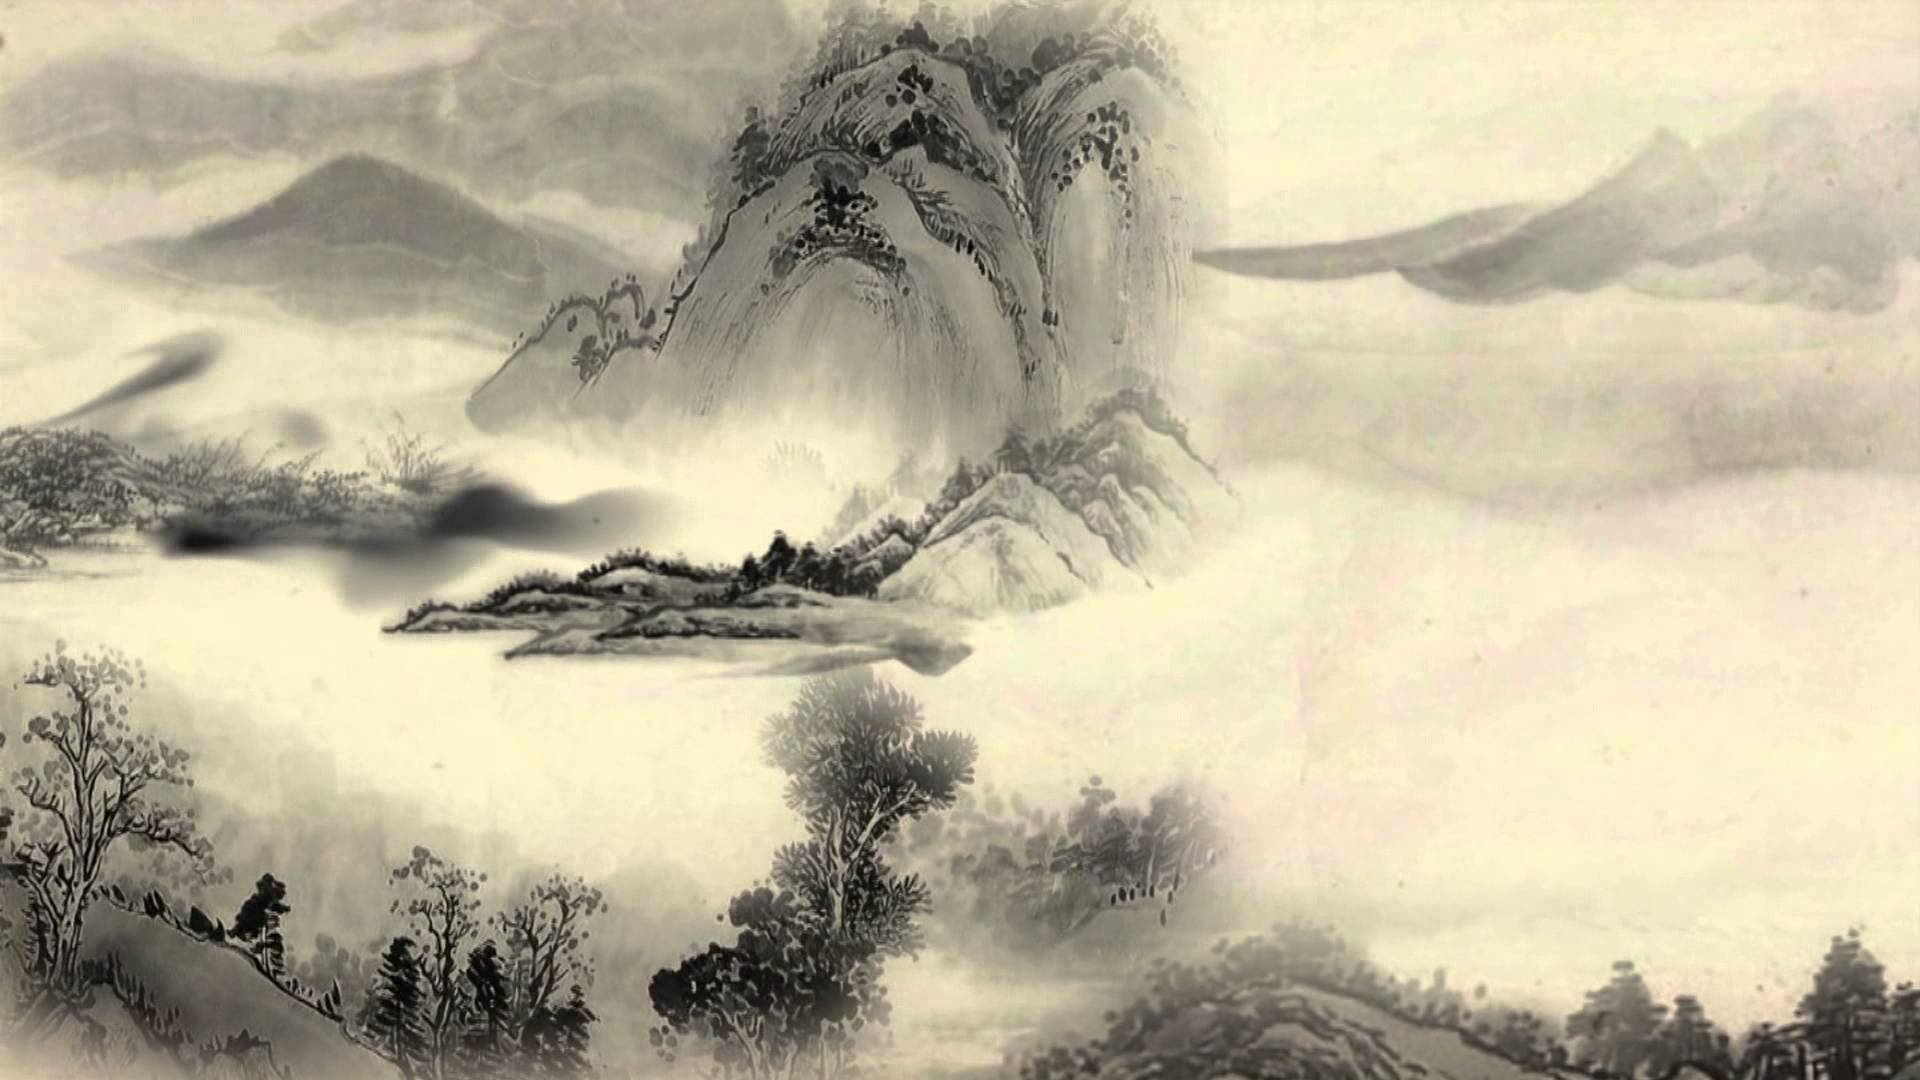 Chinese Painting Wallpaper On